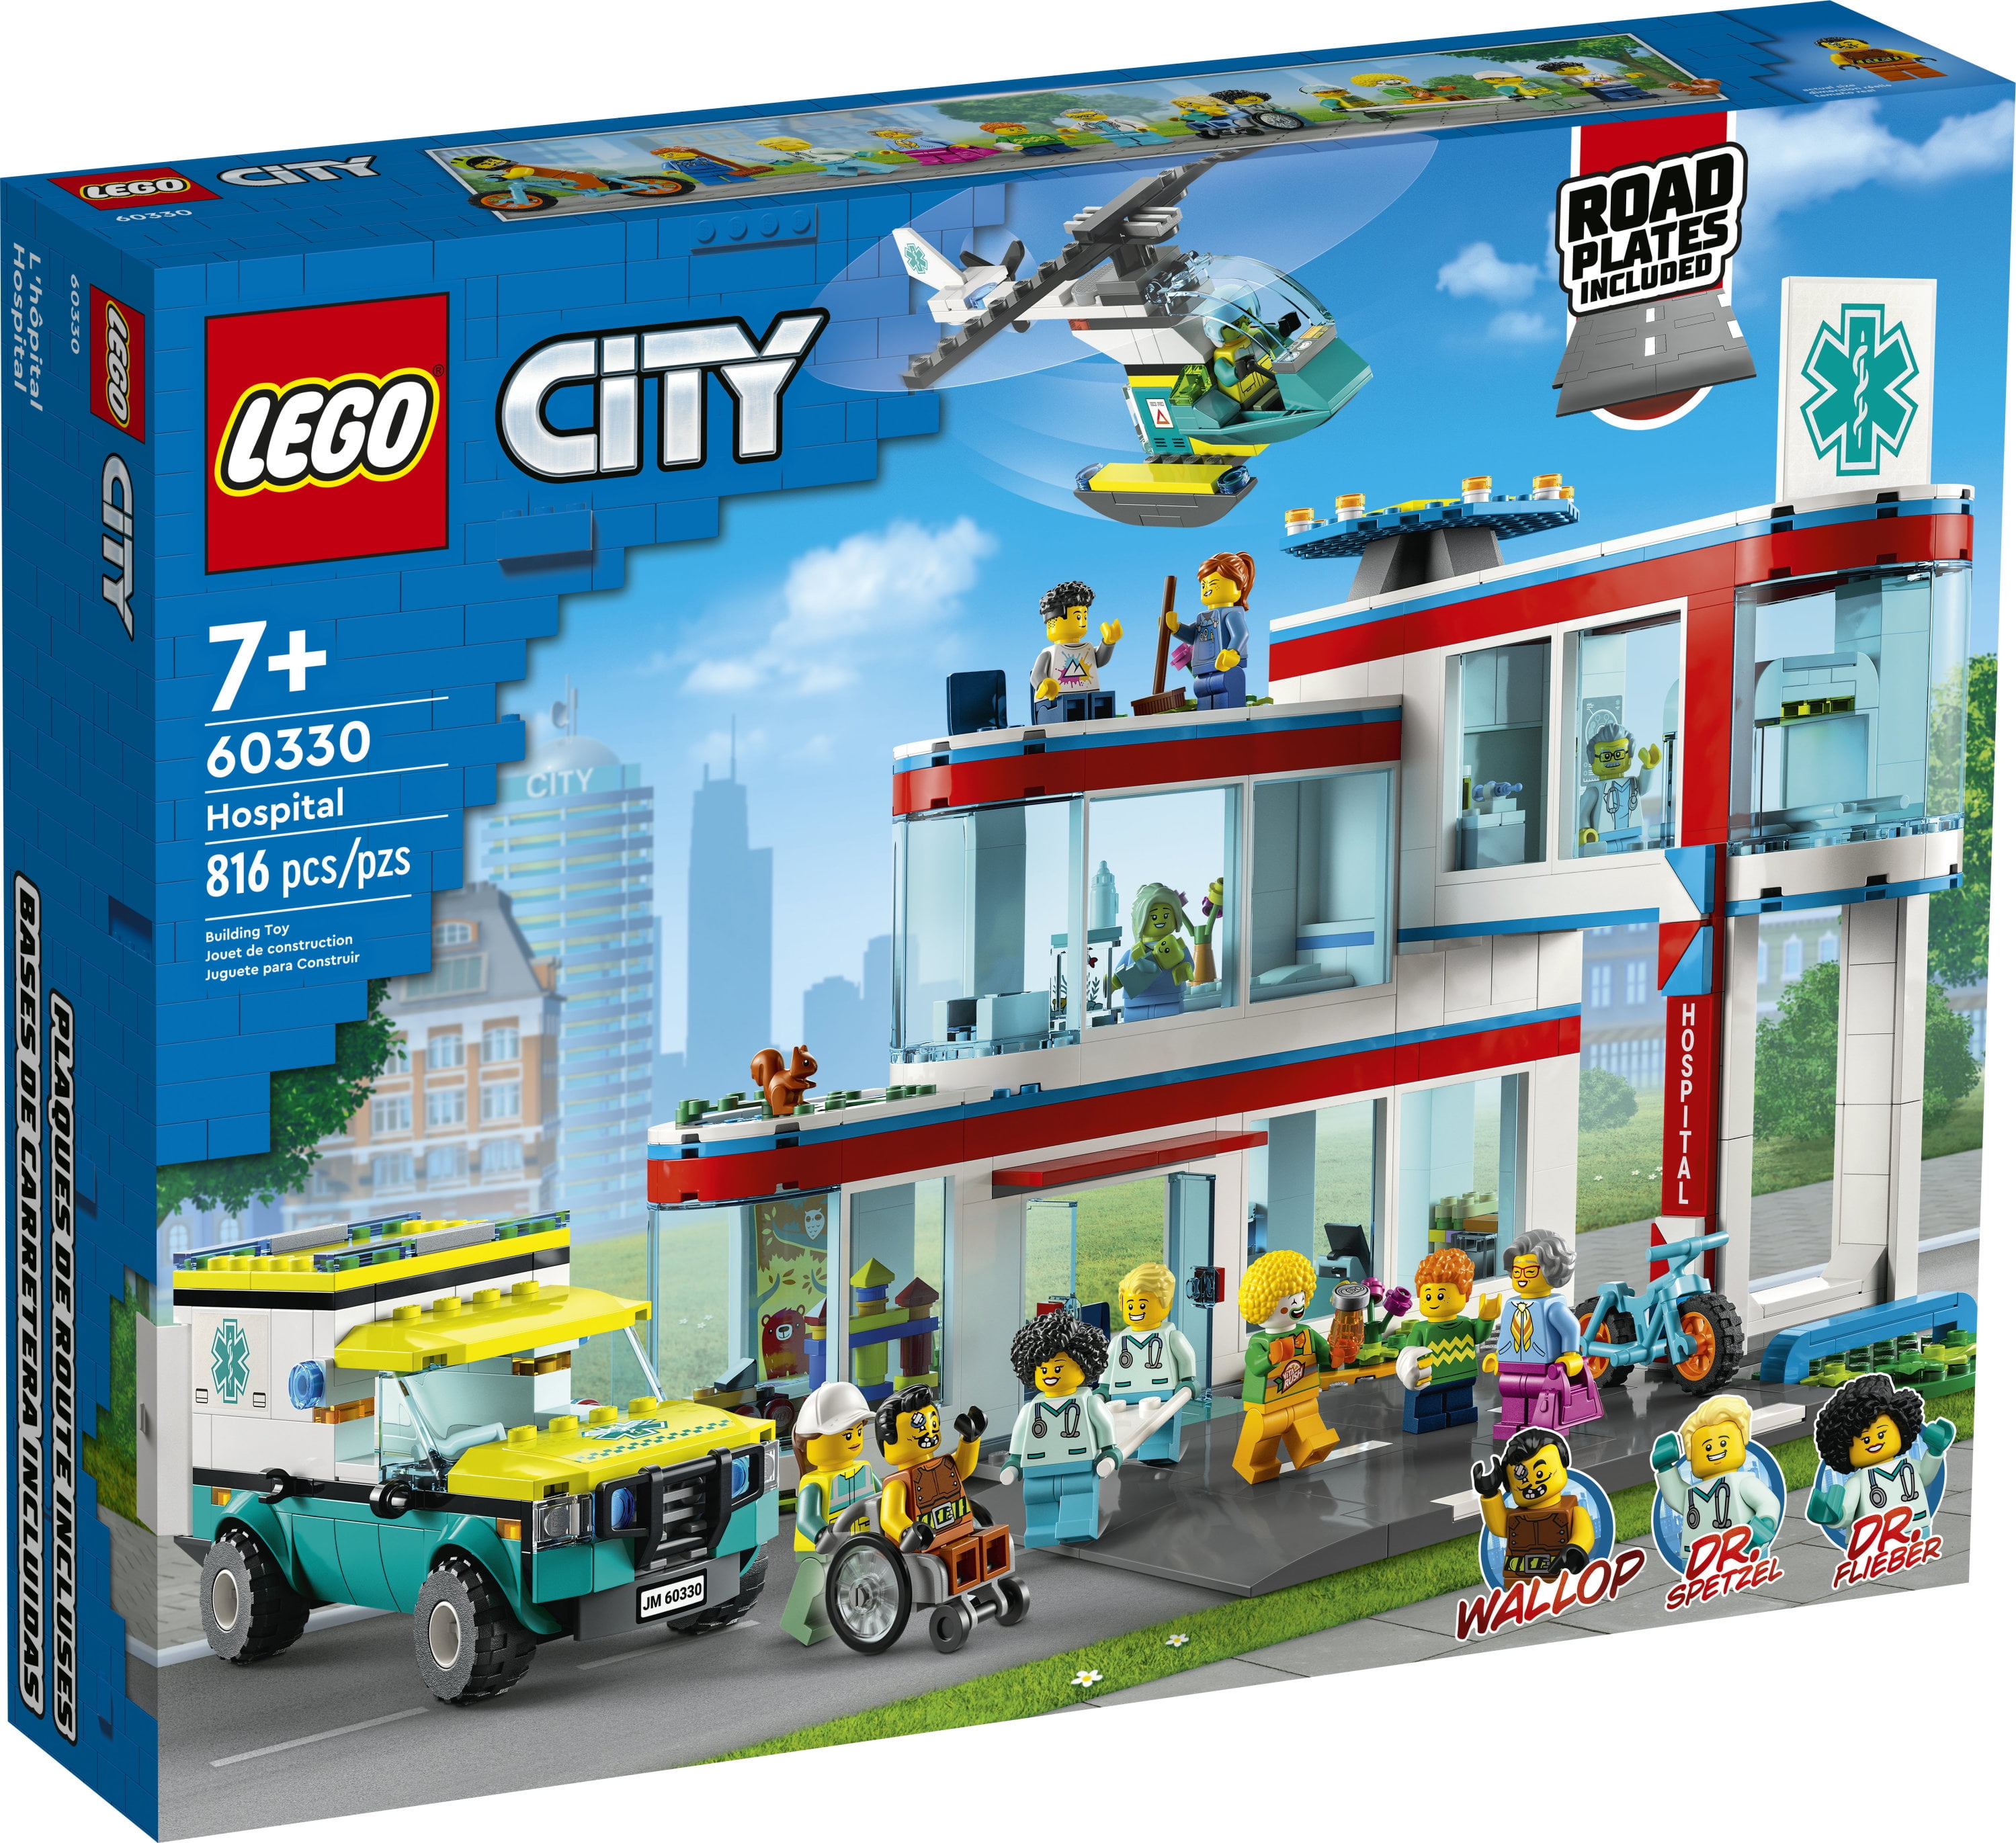 LEGO City Building Set 60330 Toy Ambulance, Rescue Helicopter 12 Mini Figures, Pretend Play Toy Hospital for Educational Fun, Connect to Other LEGO City Sets, for Kids Age 7+ - Walmart.com